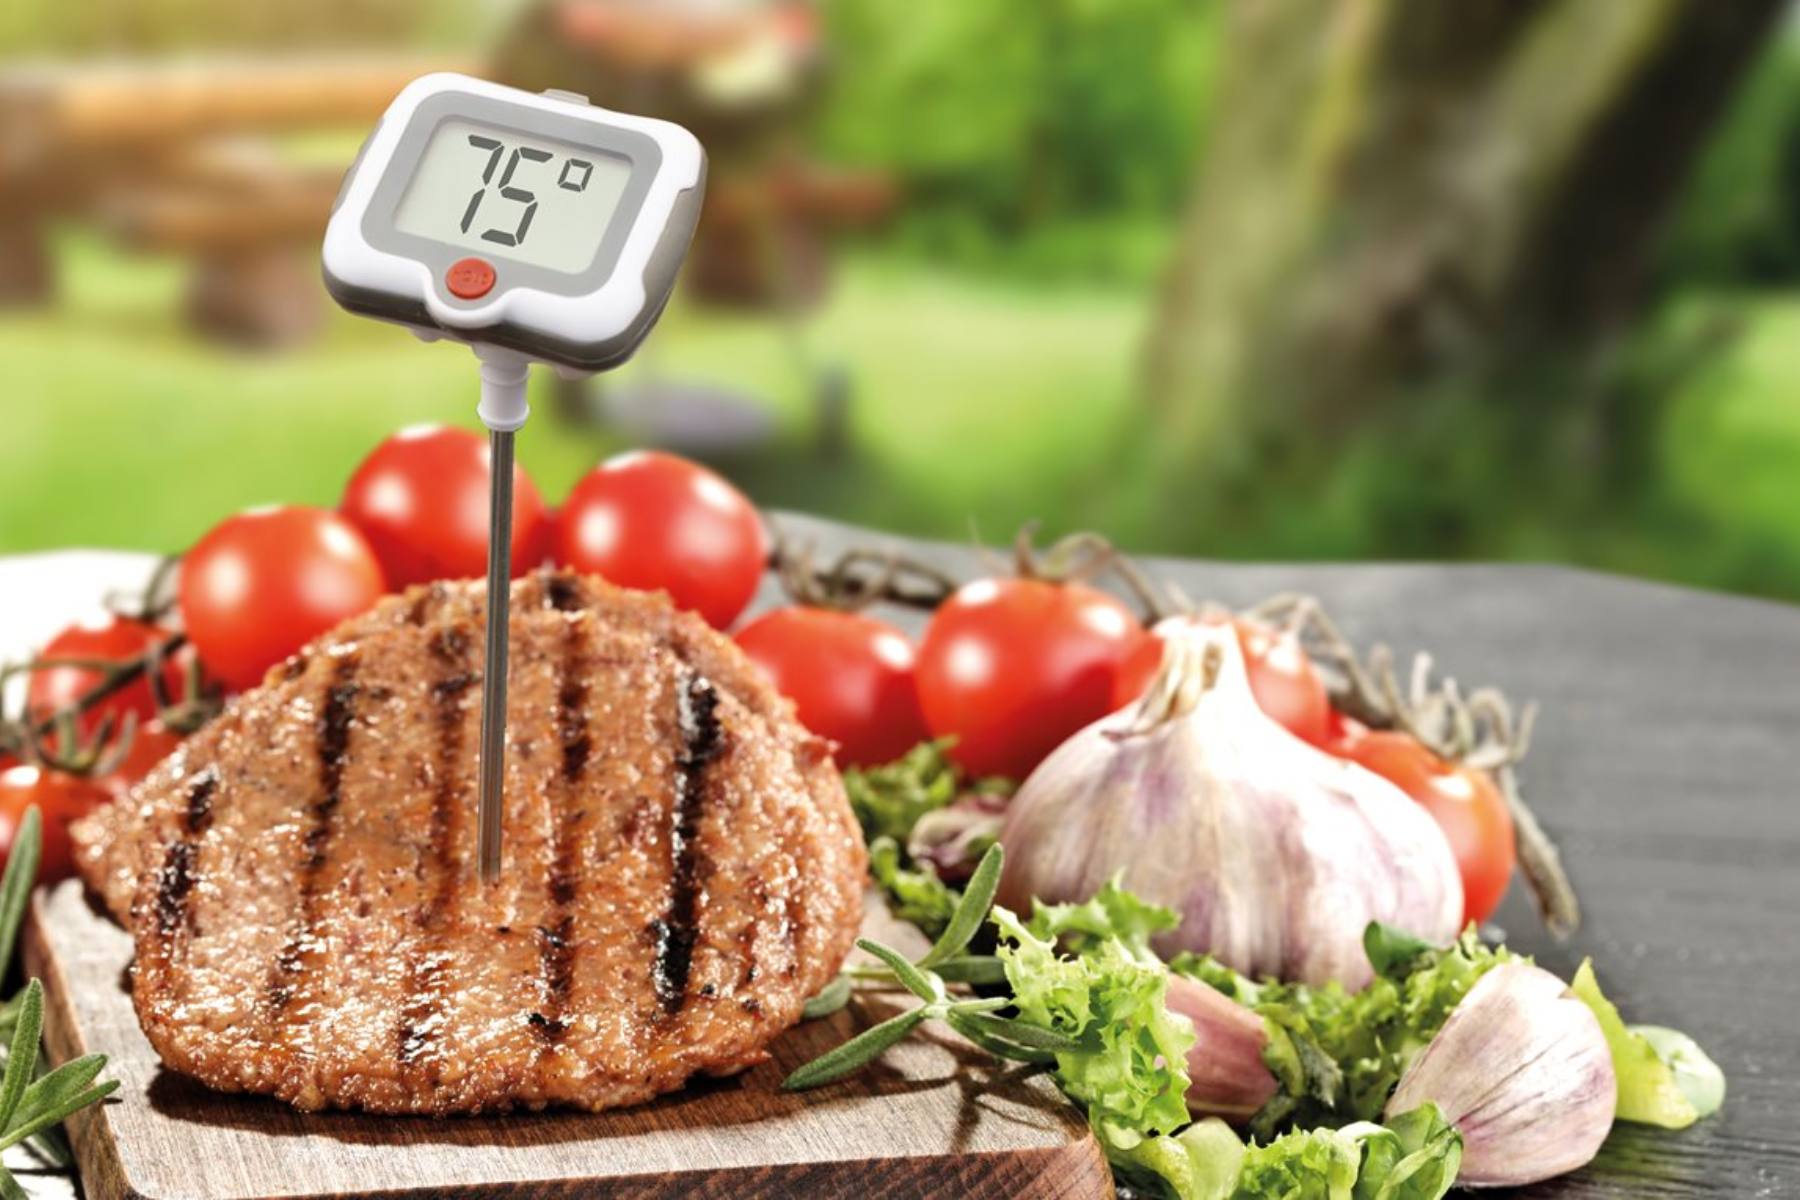 A meat with a temperature gauge that says "70°" and other vegetables nearby